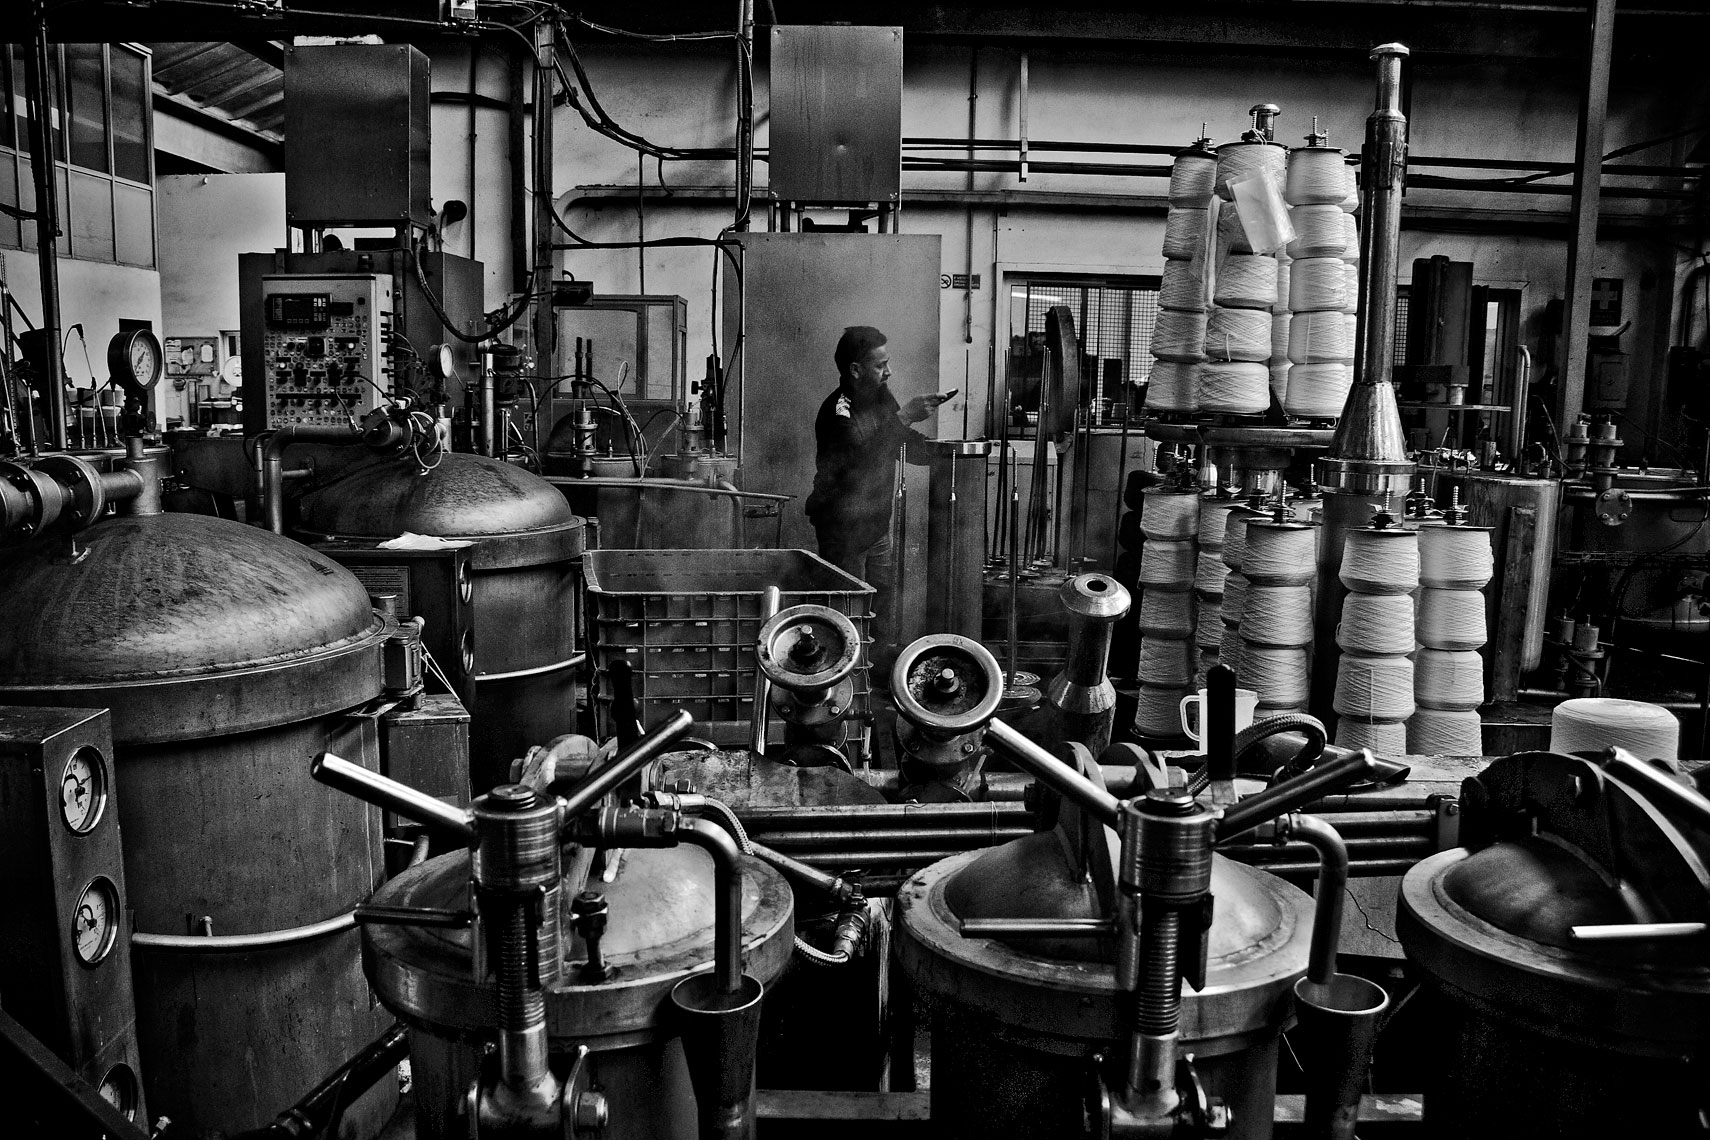 ITALY. Prato, 31st March 2009.  Inside a yarns dyeing factory.